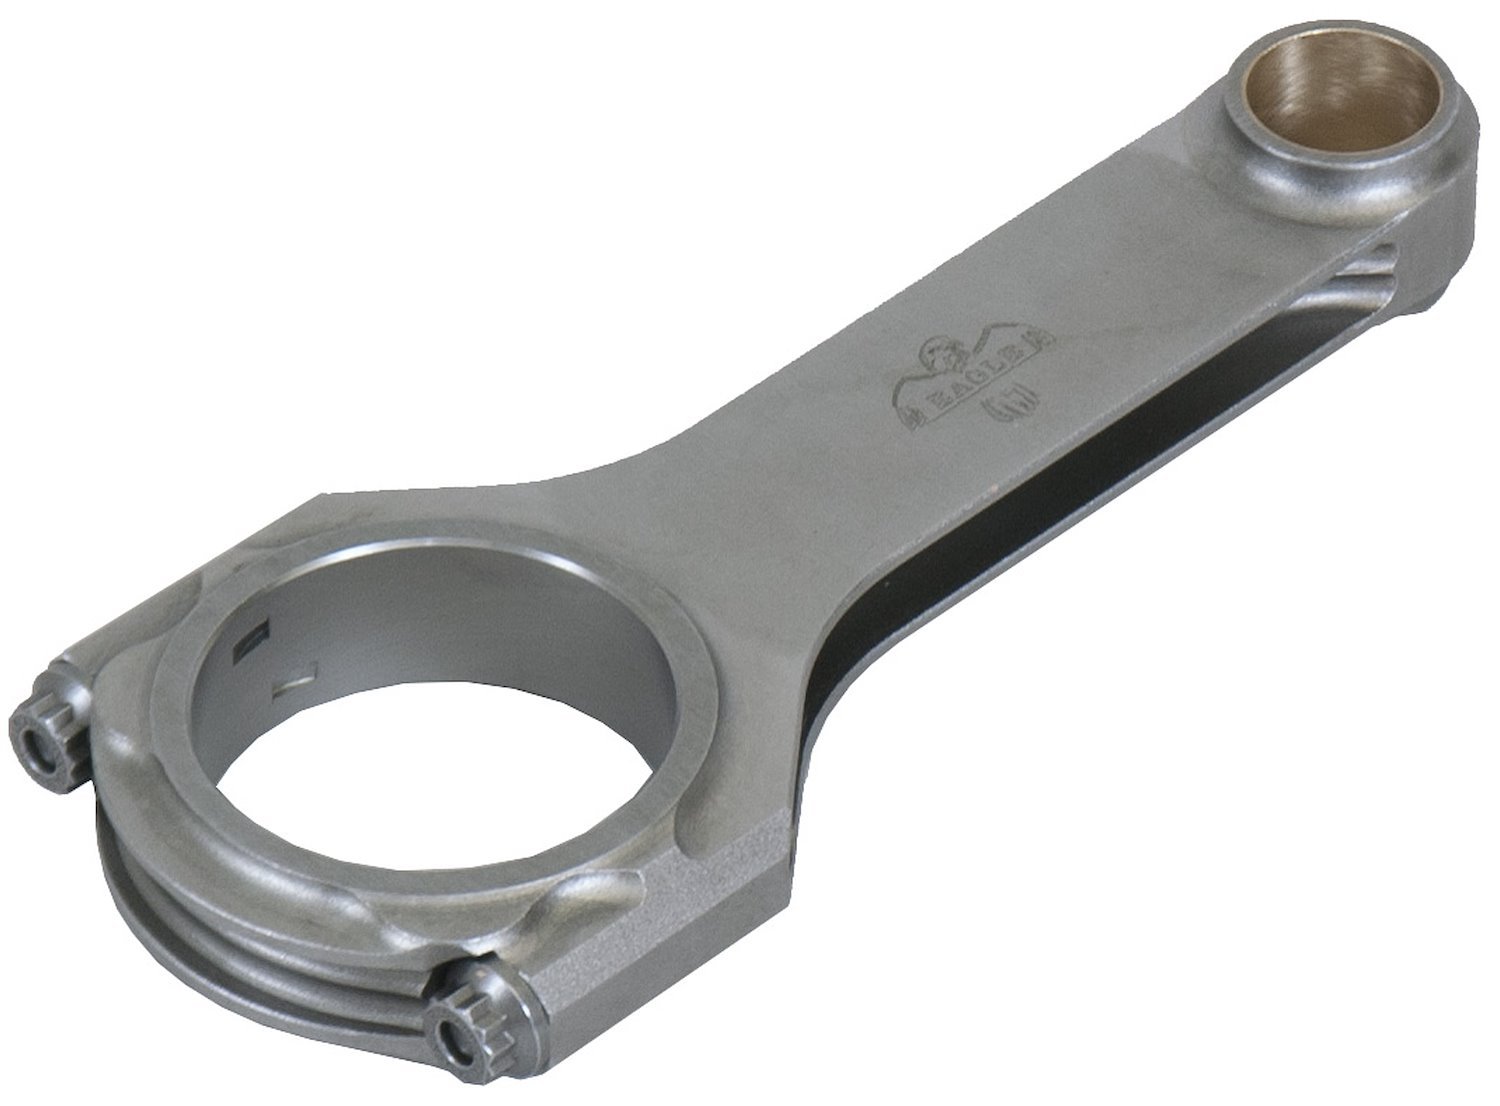 CRS5893A4D-1 H-Beam 4th Generation Design (4D) 5.893 in. Forged Steel Connecting Rod for Honda, Acura F22c Engine